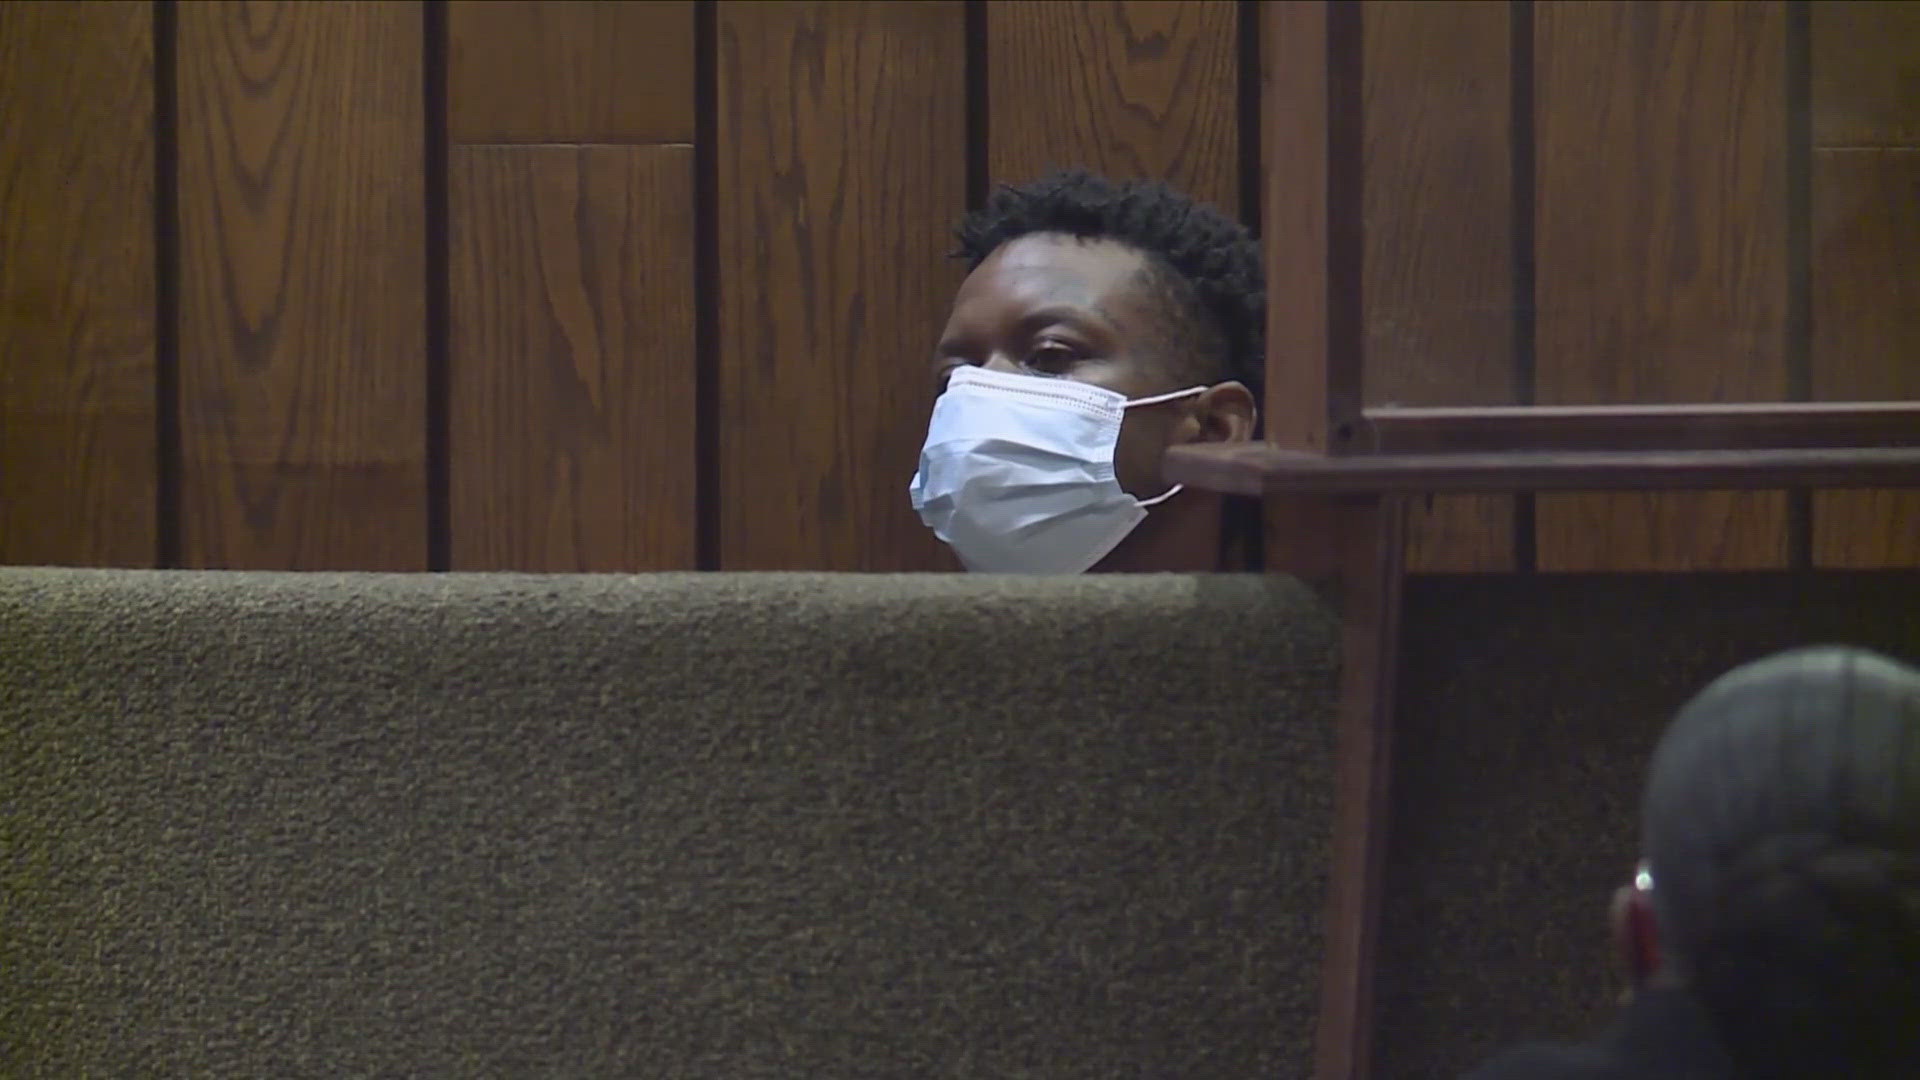 Brittney Ireland, the children's mother, was in court as one of the shooting suspects appeared for a hearing June 27.